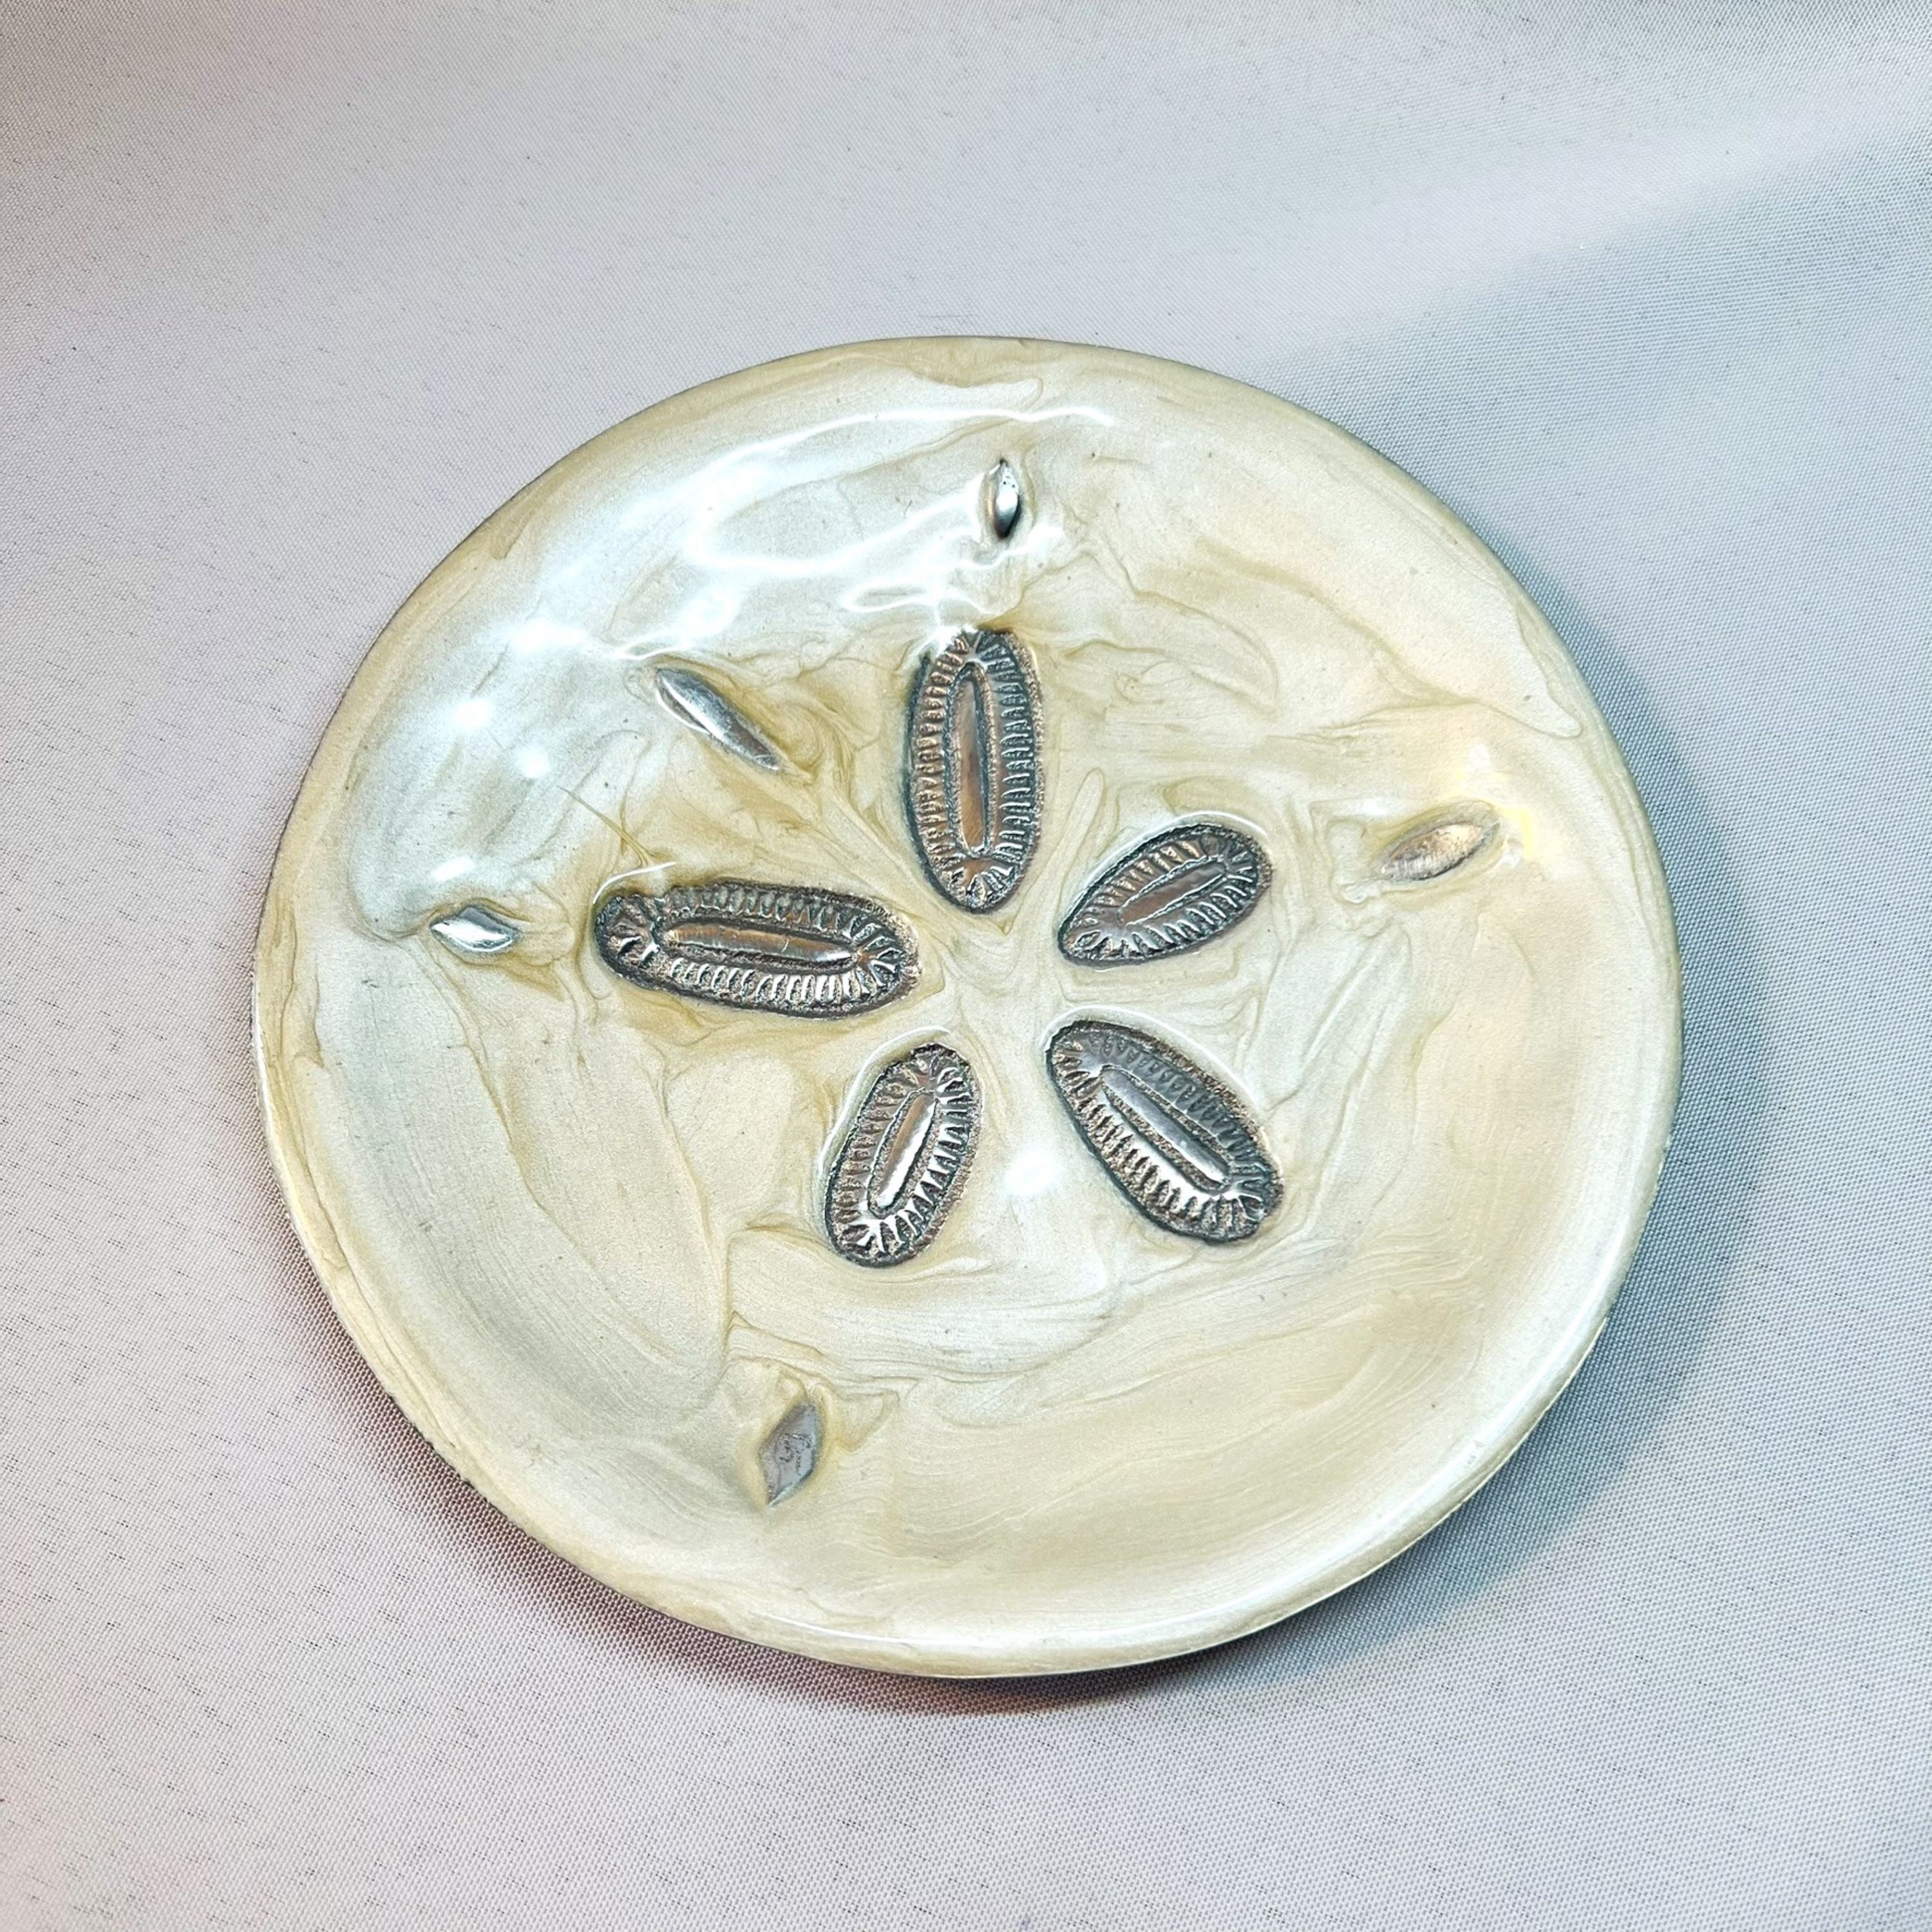 Small Pewter Sand Dollar  Coastal Gifts, Home Accents & Decor